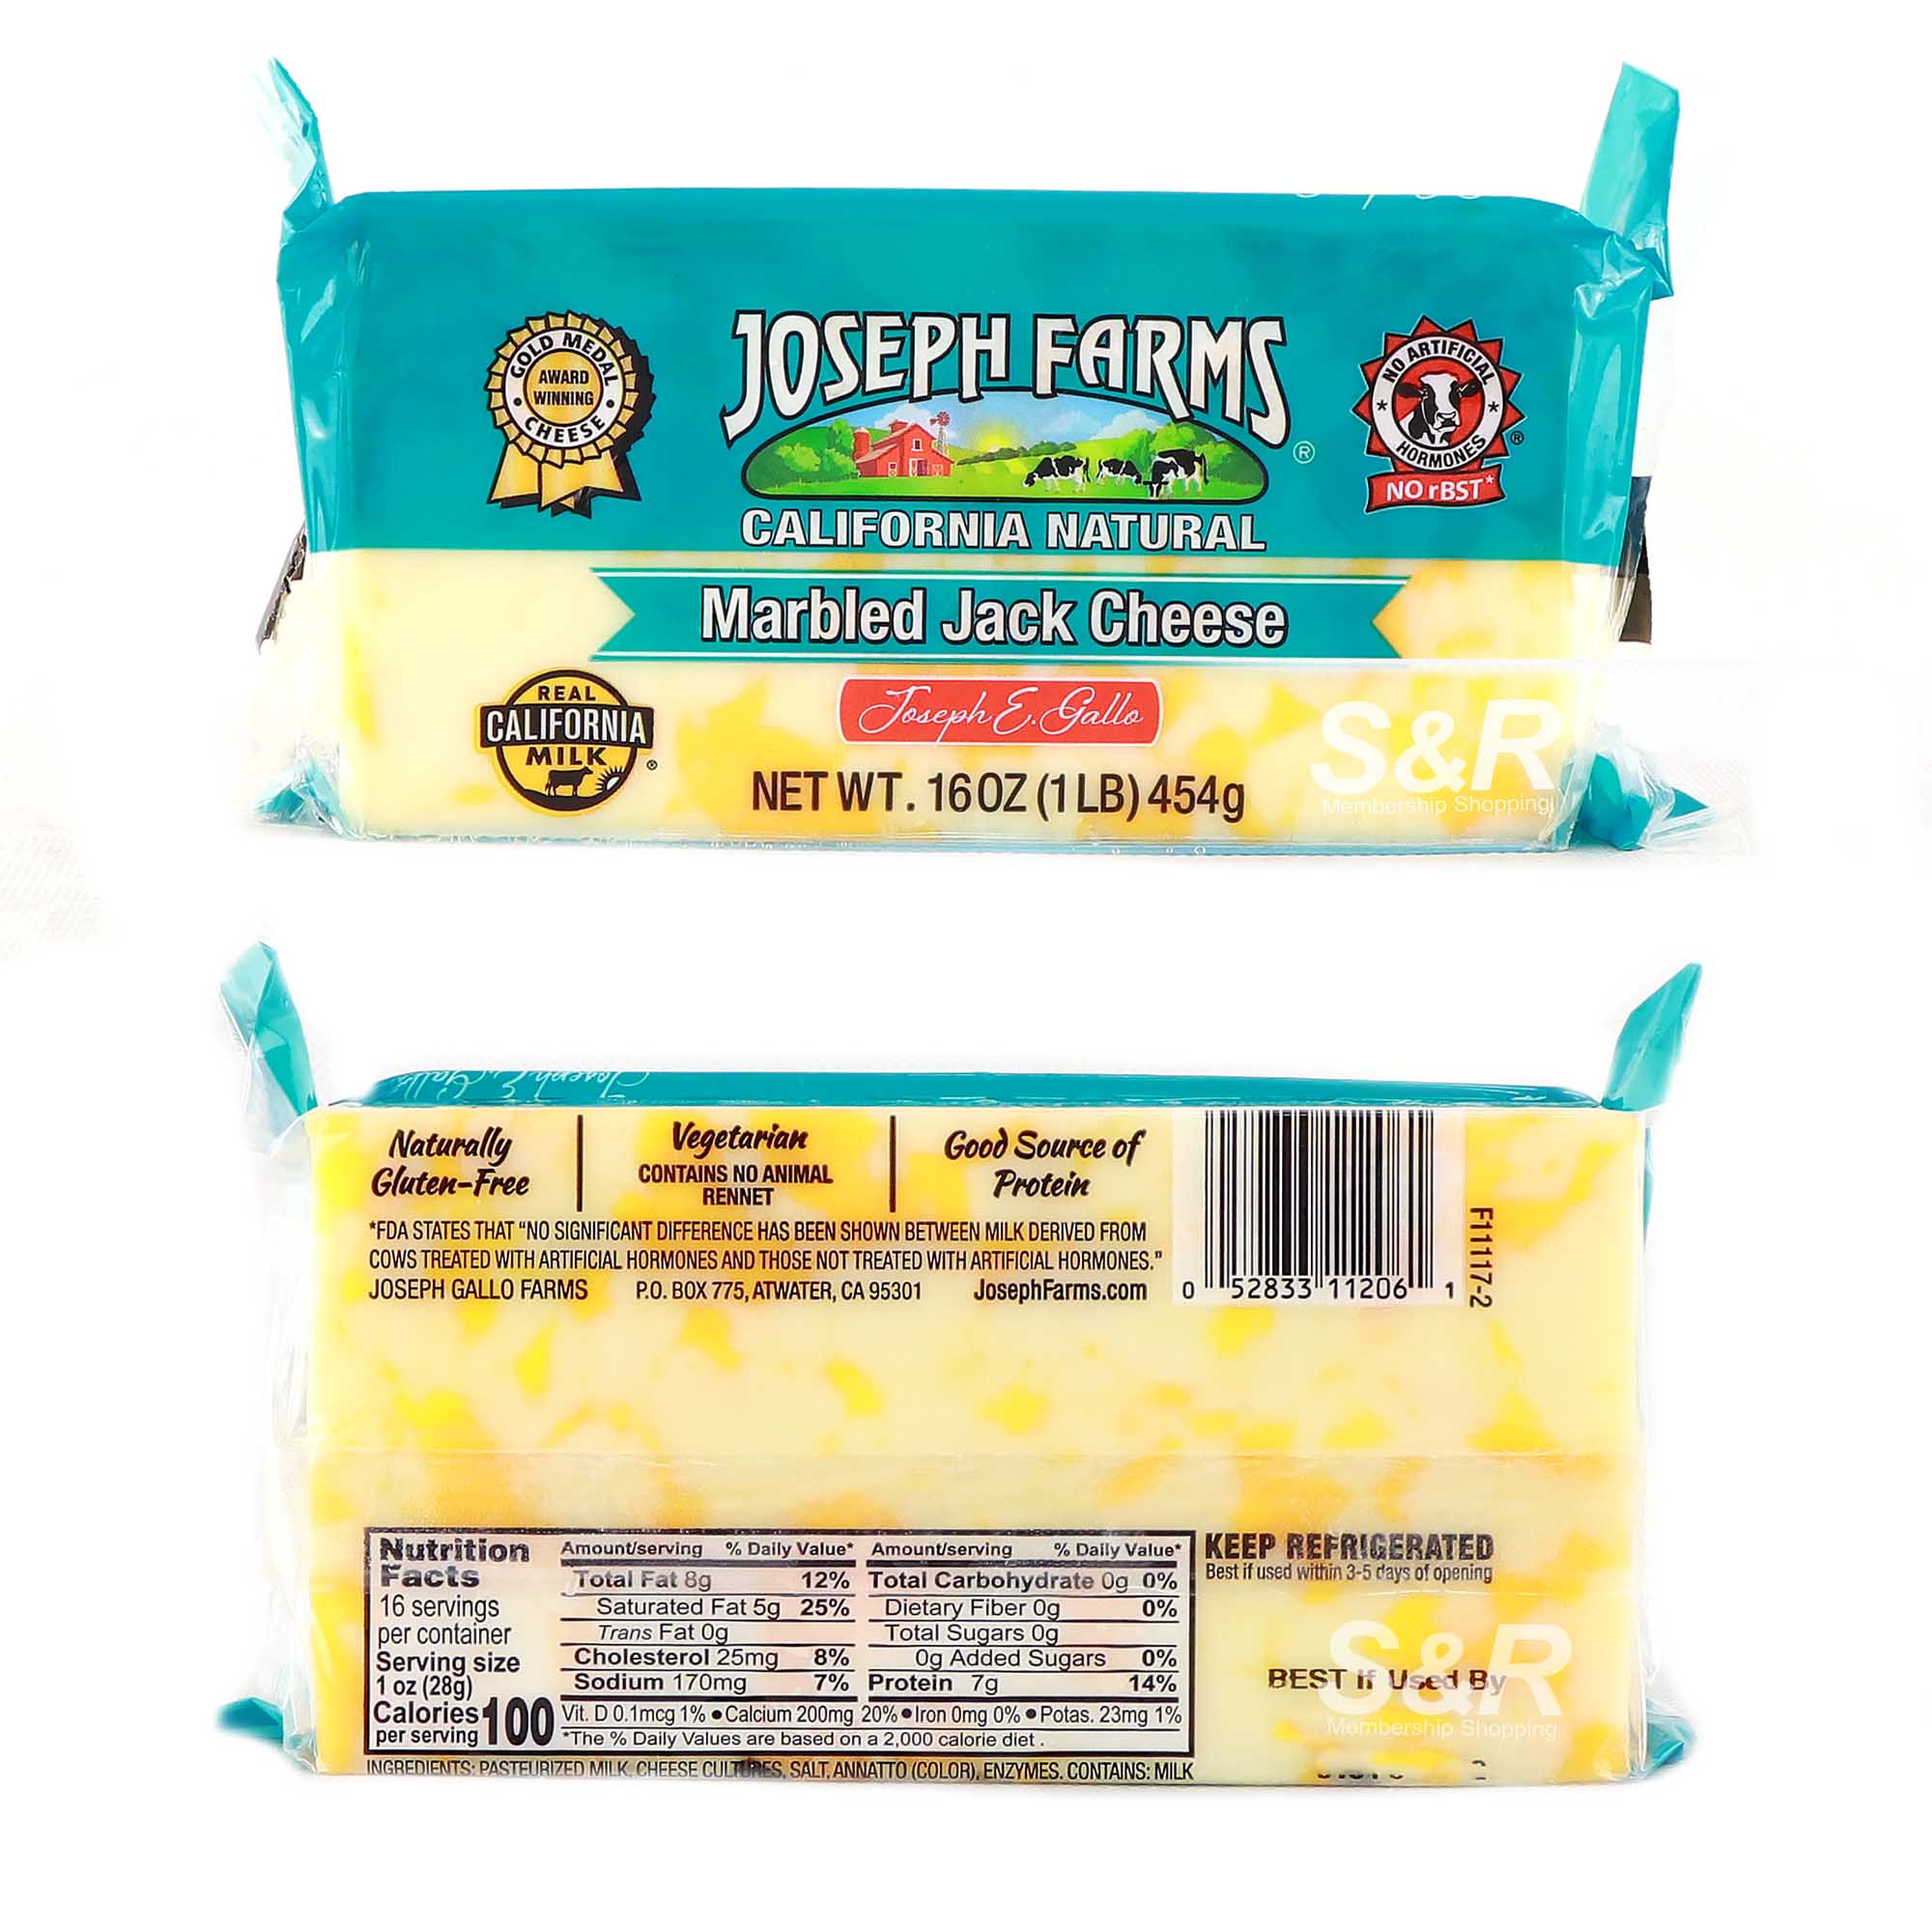 Marbled Jack Cheese